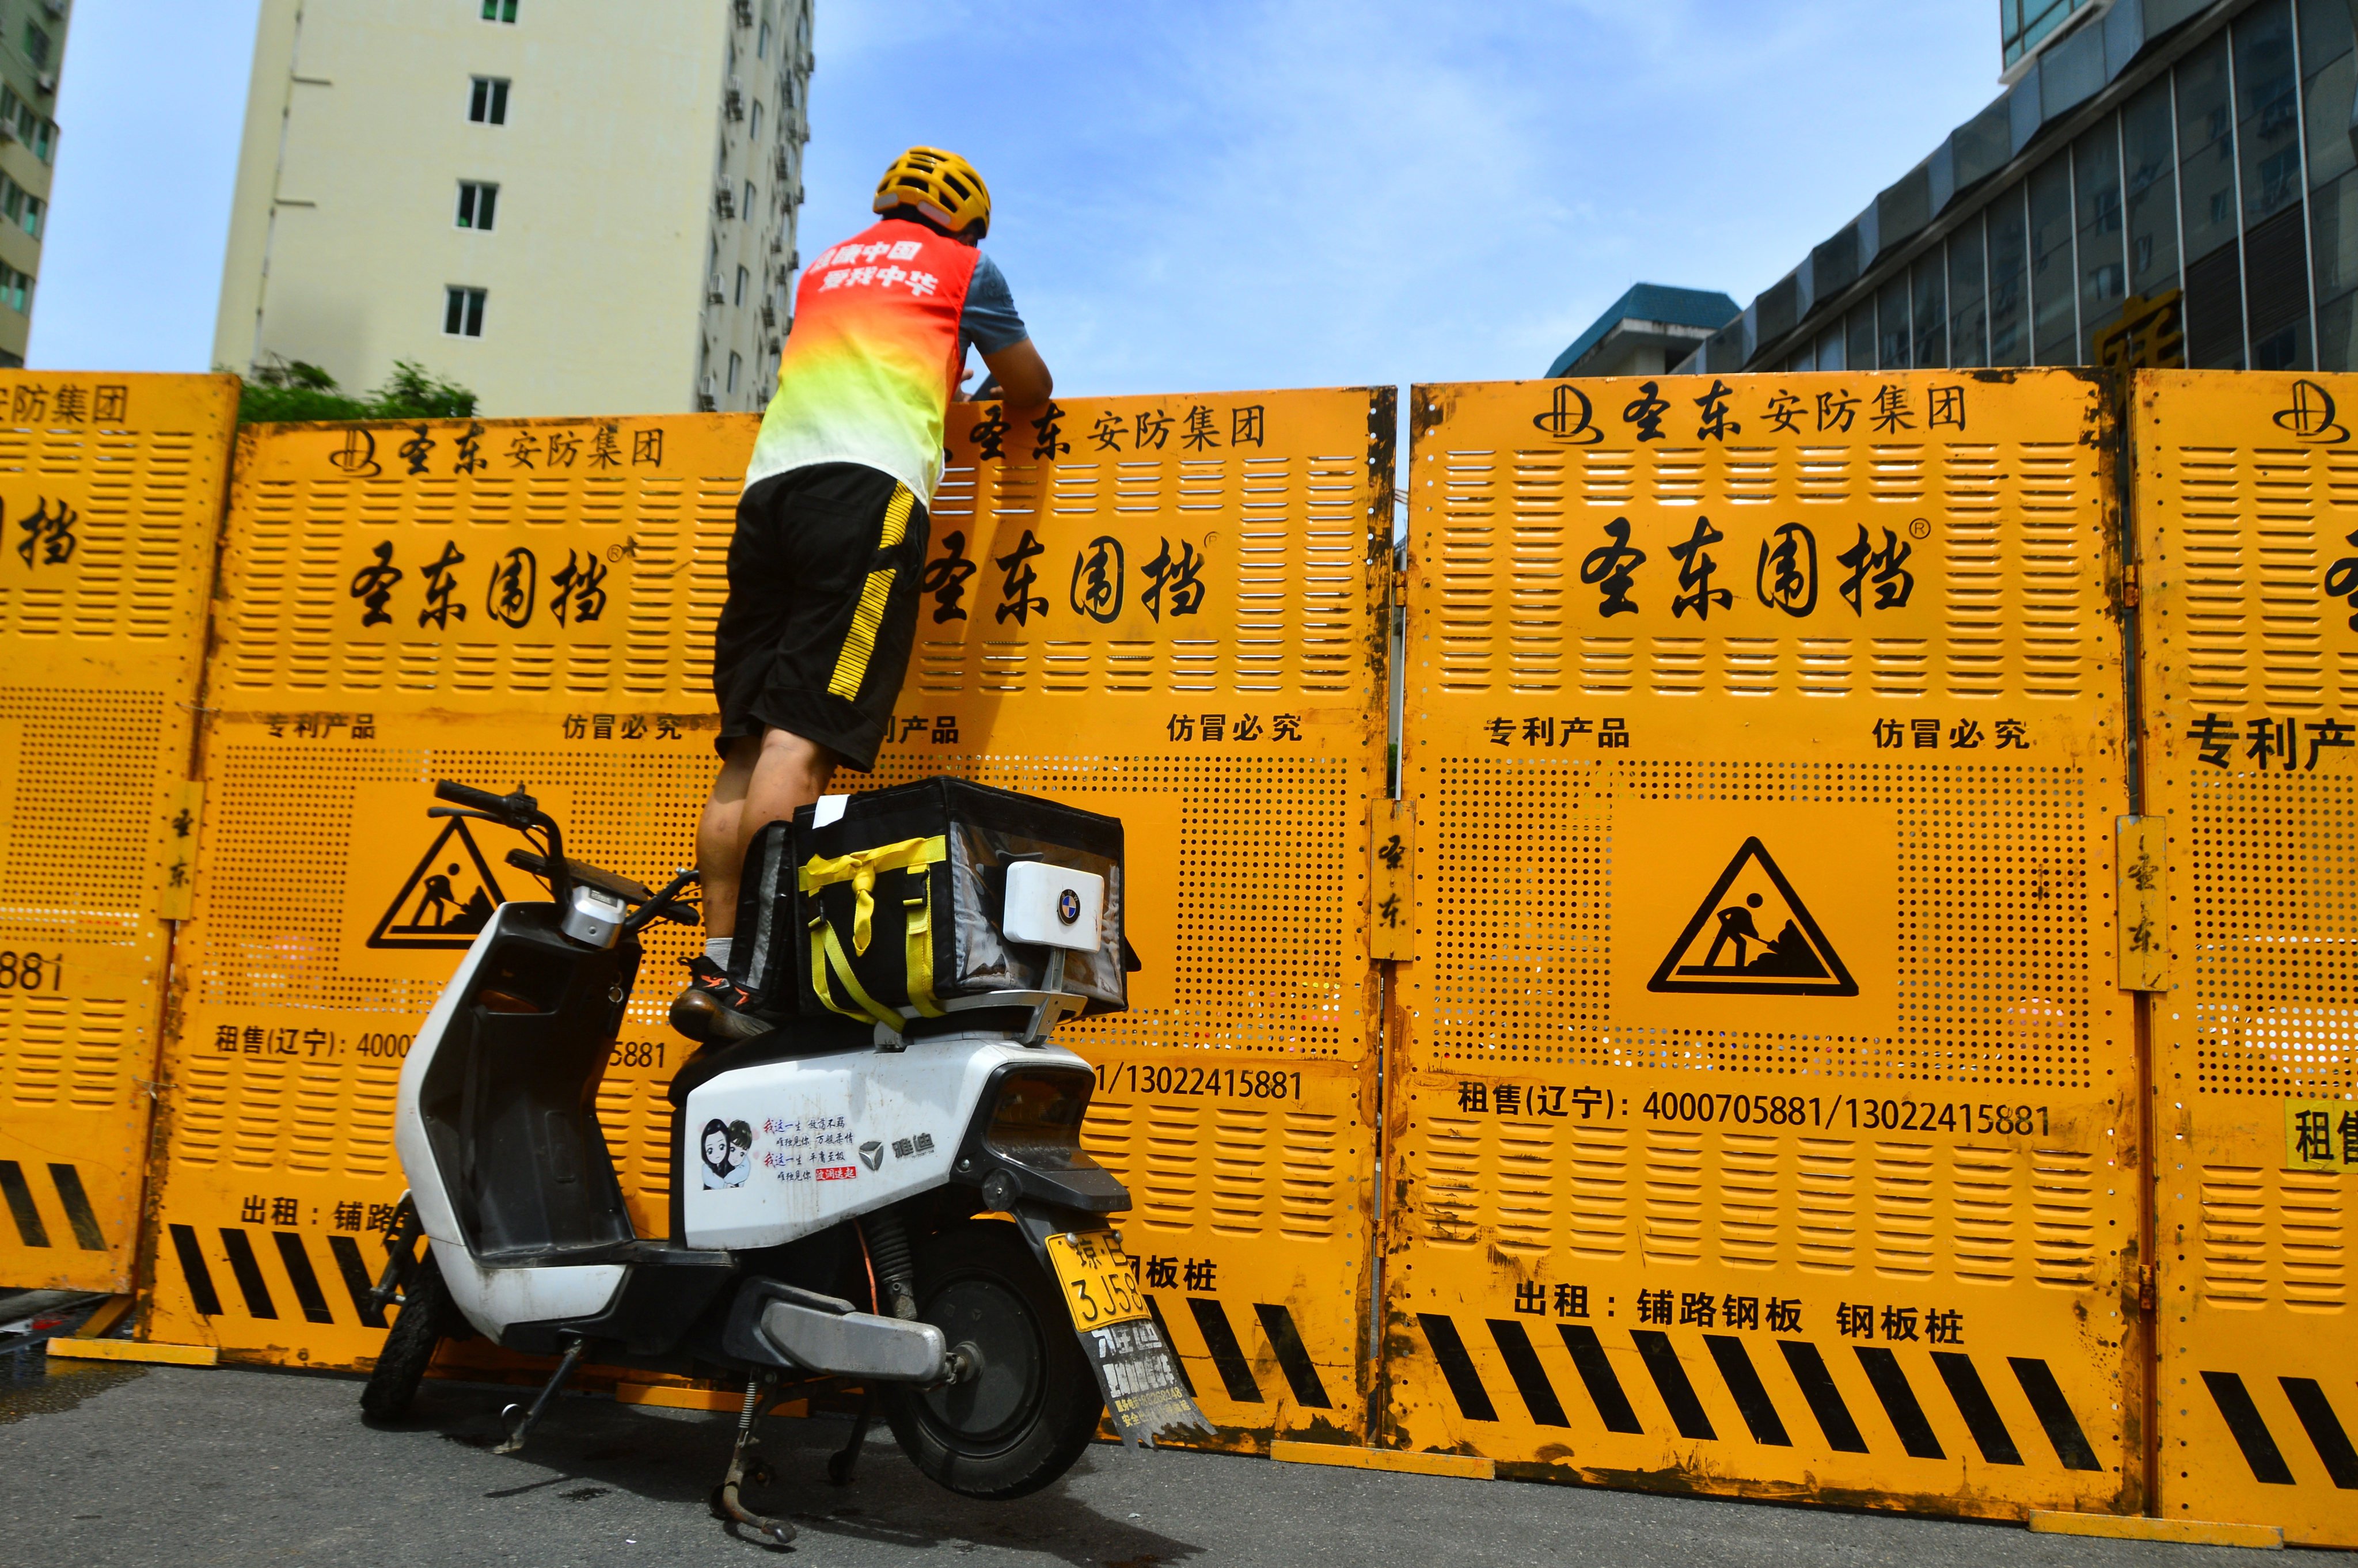 A courier makes a delivery over a barricade as Sanya goes into Covid-19 lockdown on August 6. Photo: via Reuters